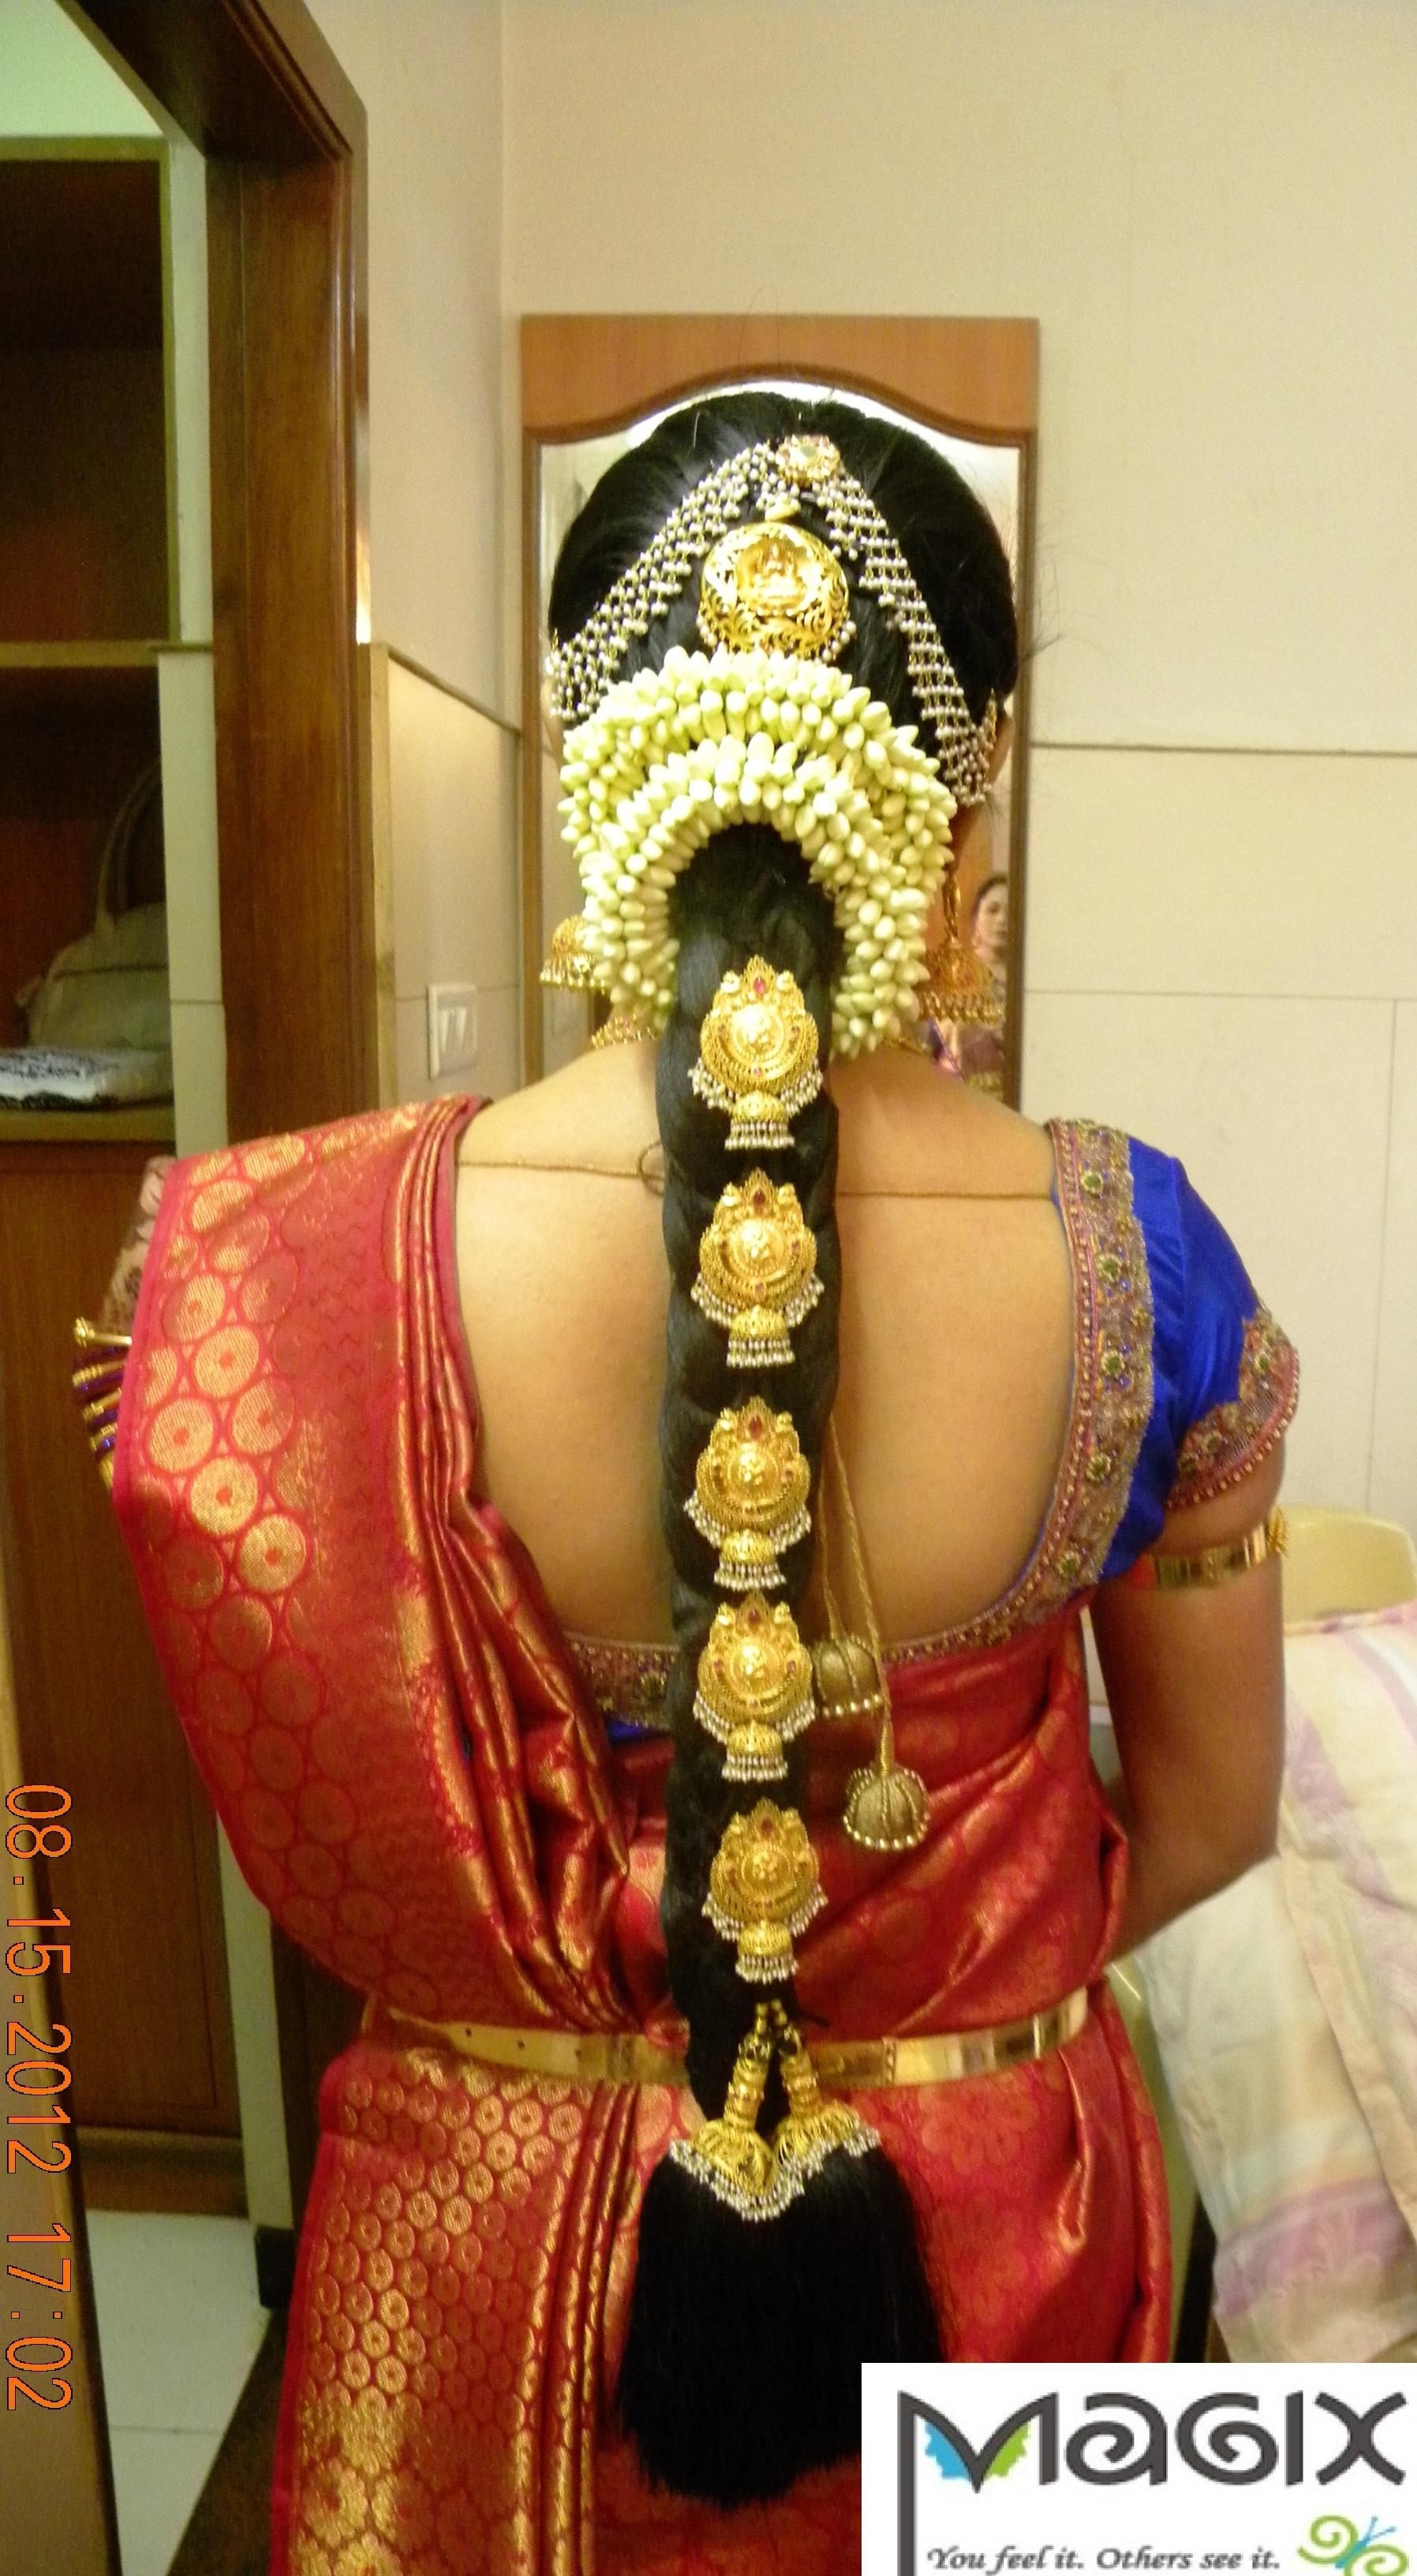 Southindian Bride With Gold Jade,muhurtham Bridal Makeover intended for South Indian Bridal Hairstyle For Muhurtham